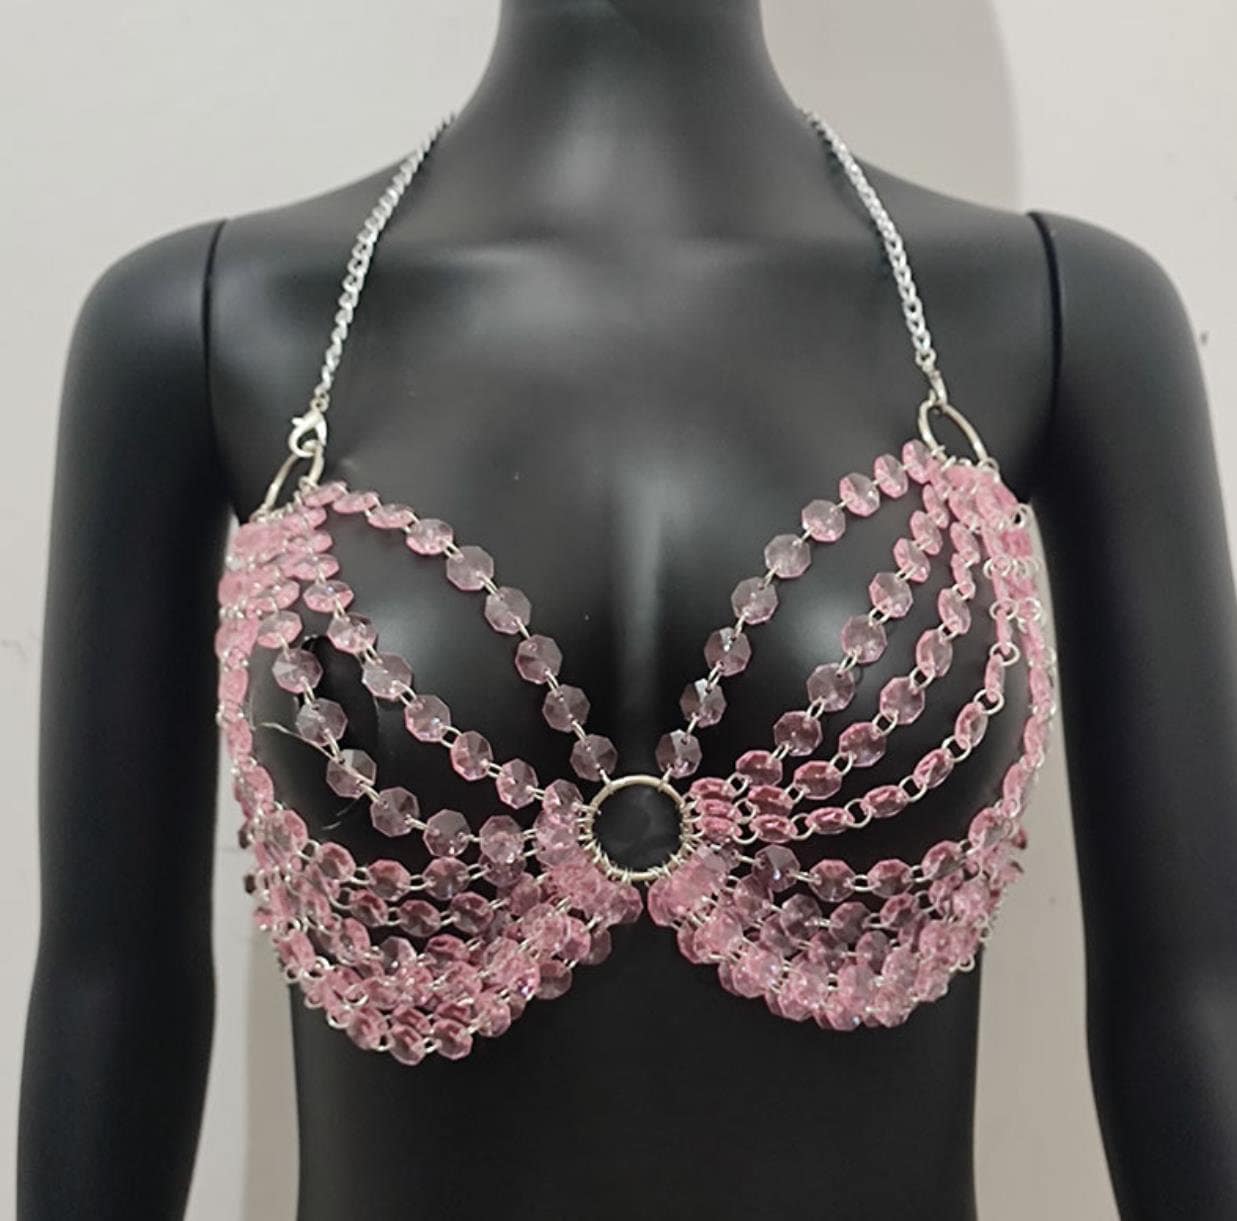 Candy Collection - Pink Chain Lace-Up Bra Top Harness – Unspoken